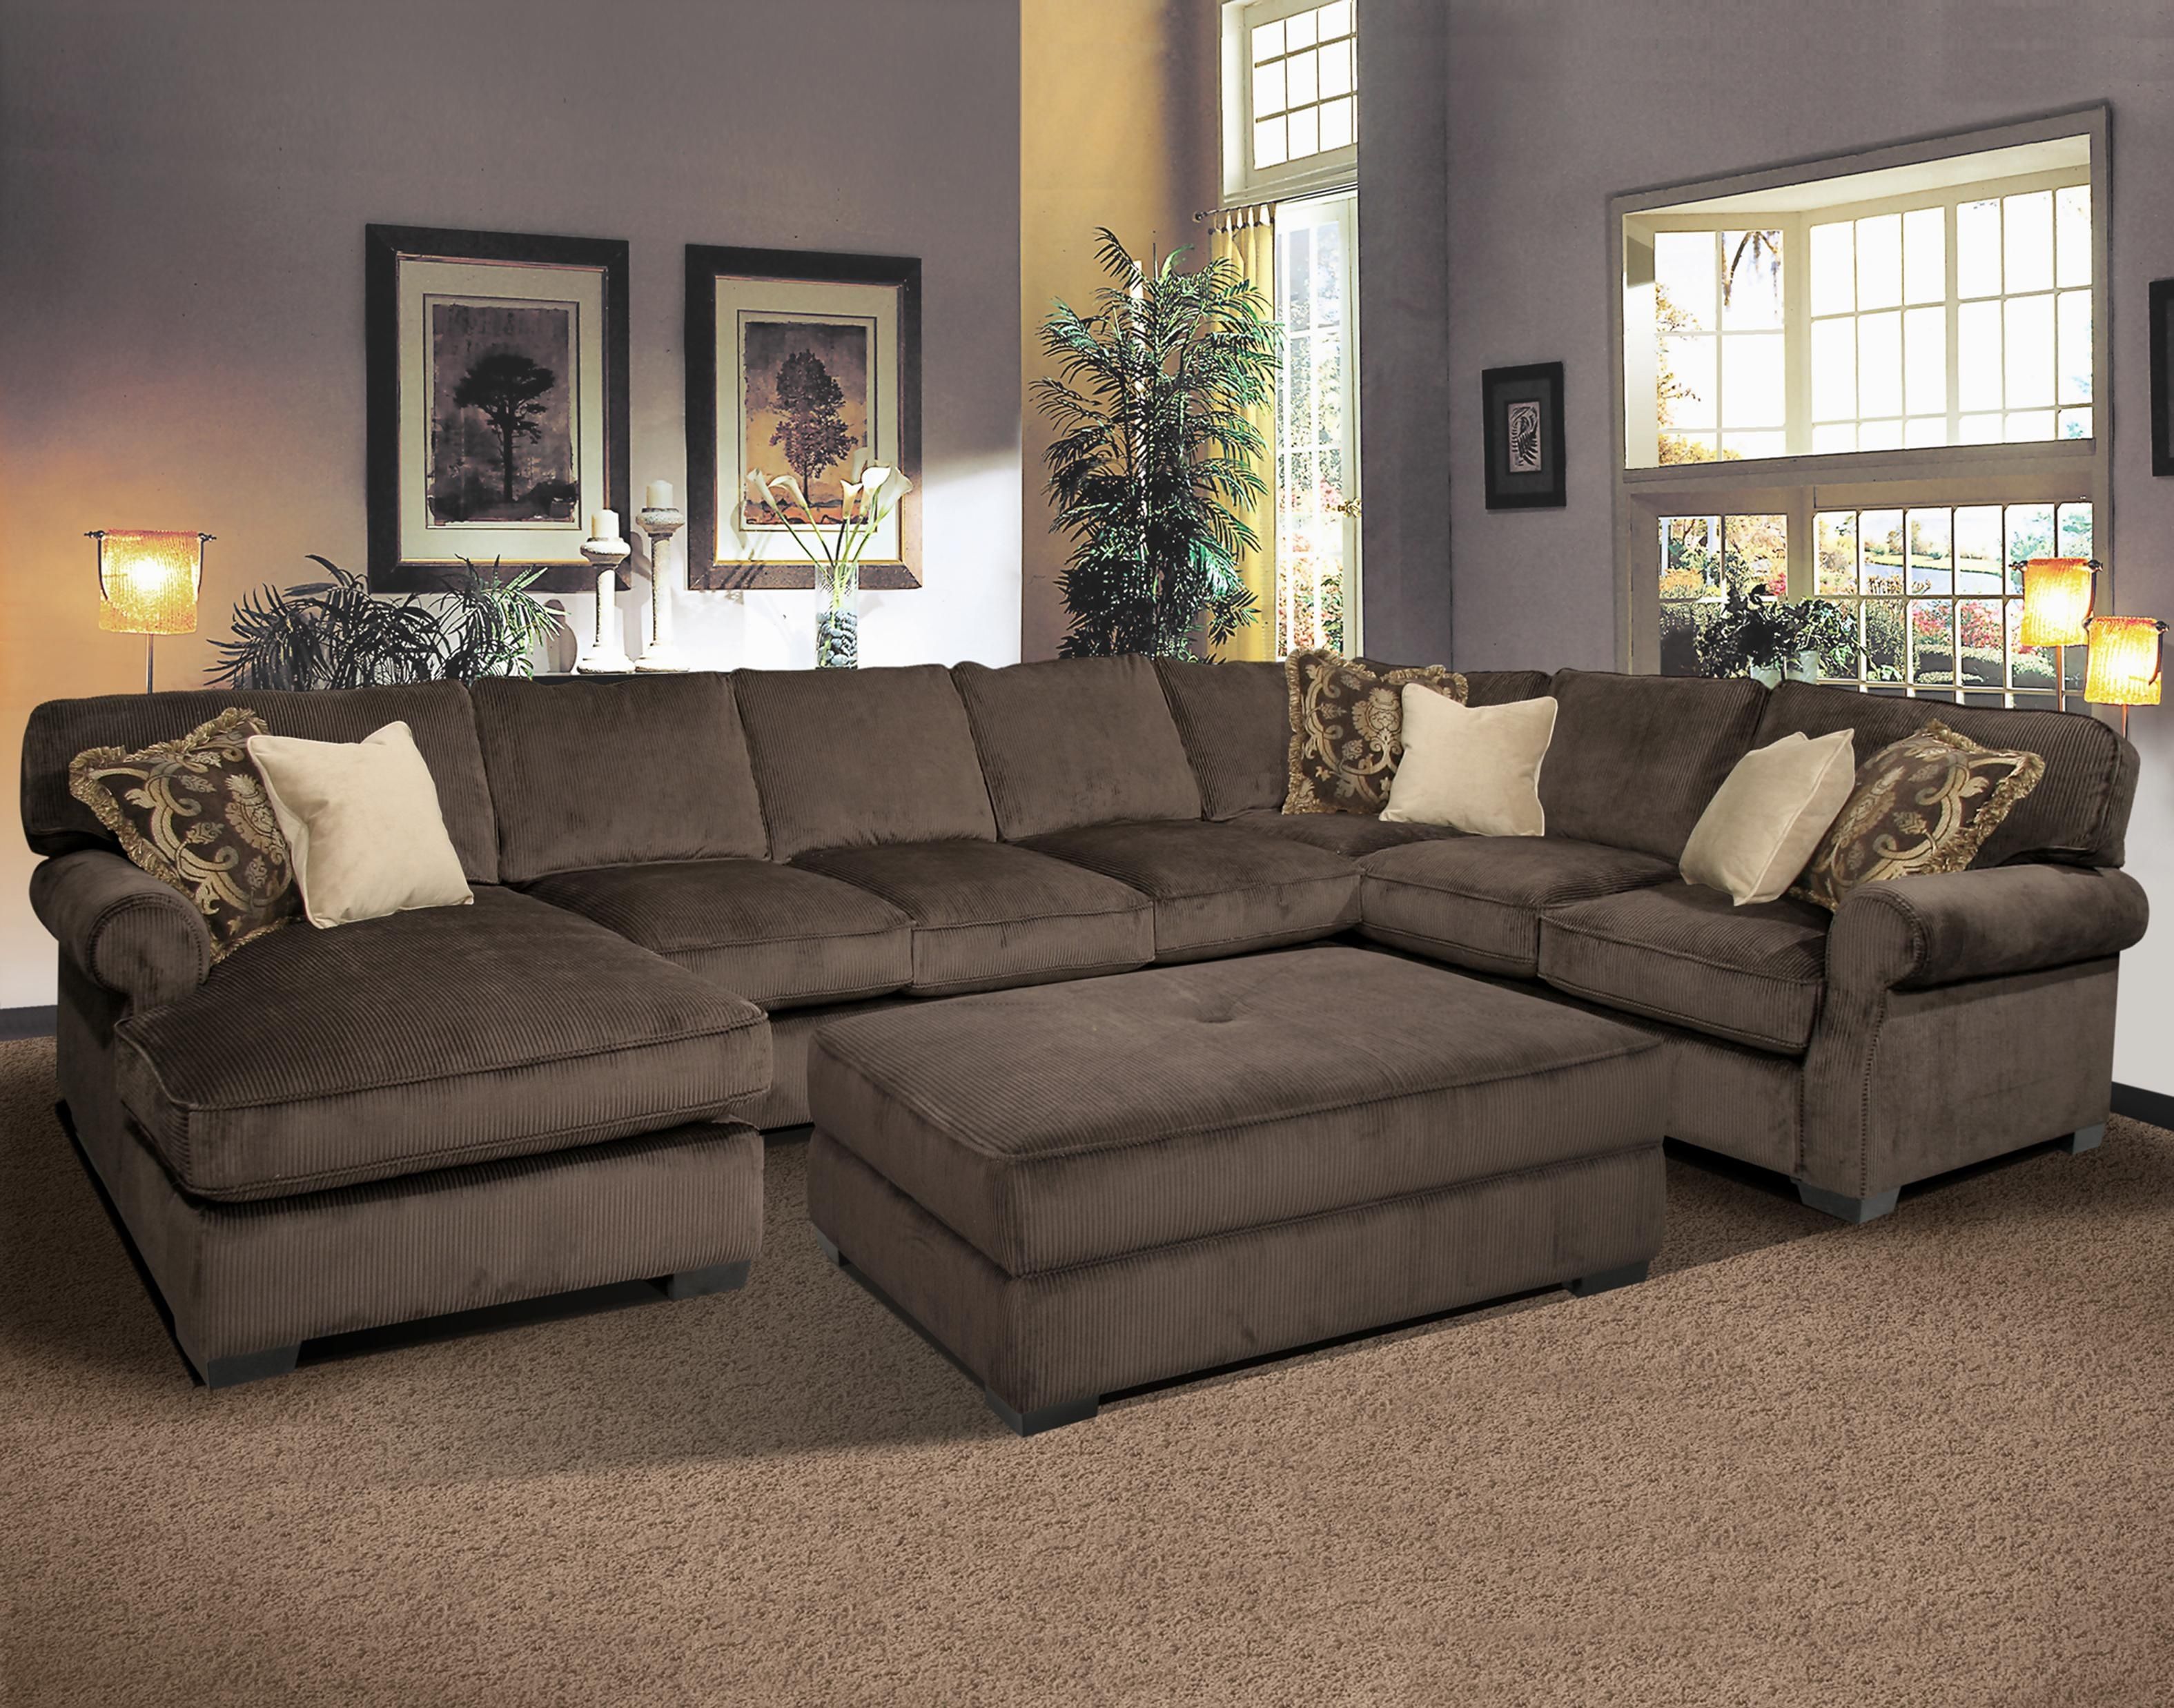 Couch. Astonishing Deep Couches For Sale: Couches Are In For Sale Inside Deep U Shaped Sectionals (Photo 3 of 10)